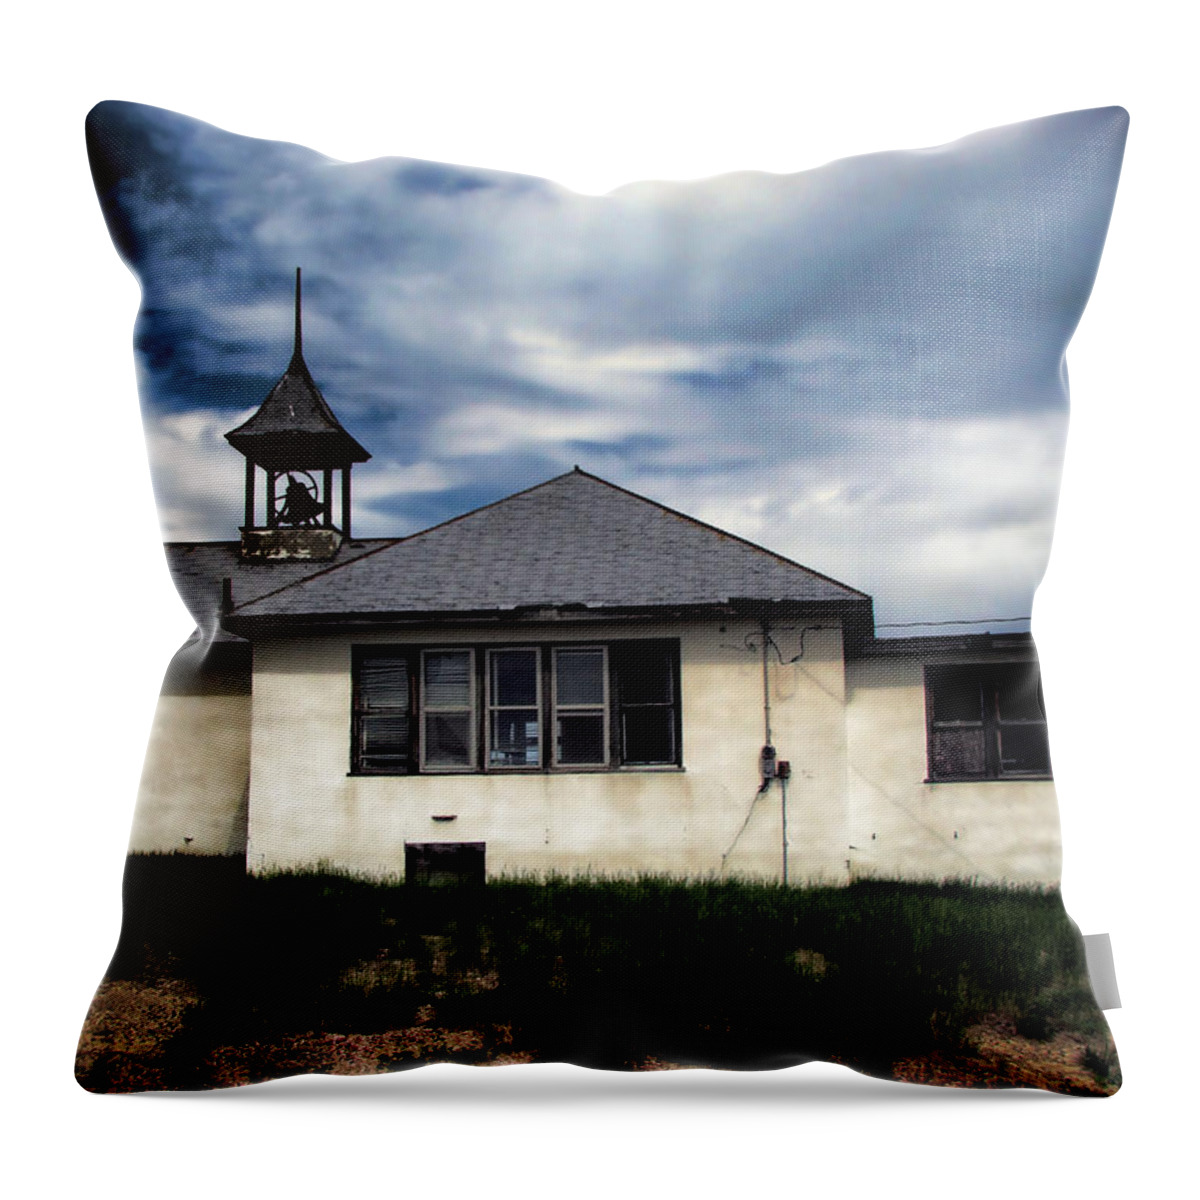 Schoolhouse Throw Pillow featuring the photograph Old Schoolhouse 3 by Cathy Anderson